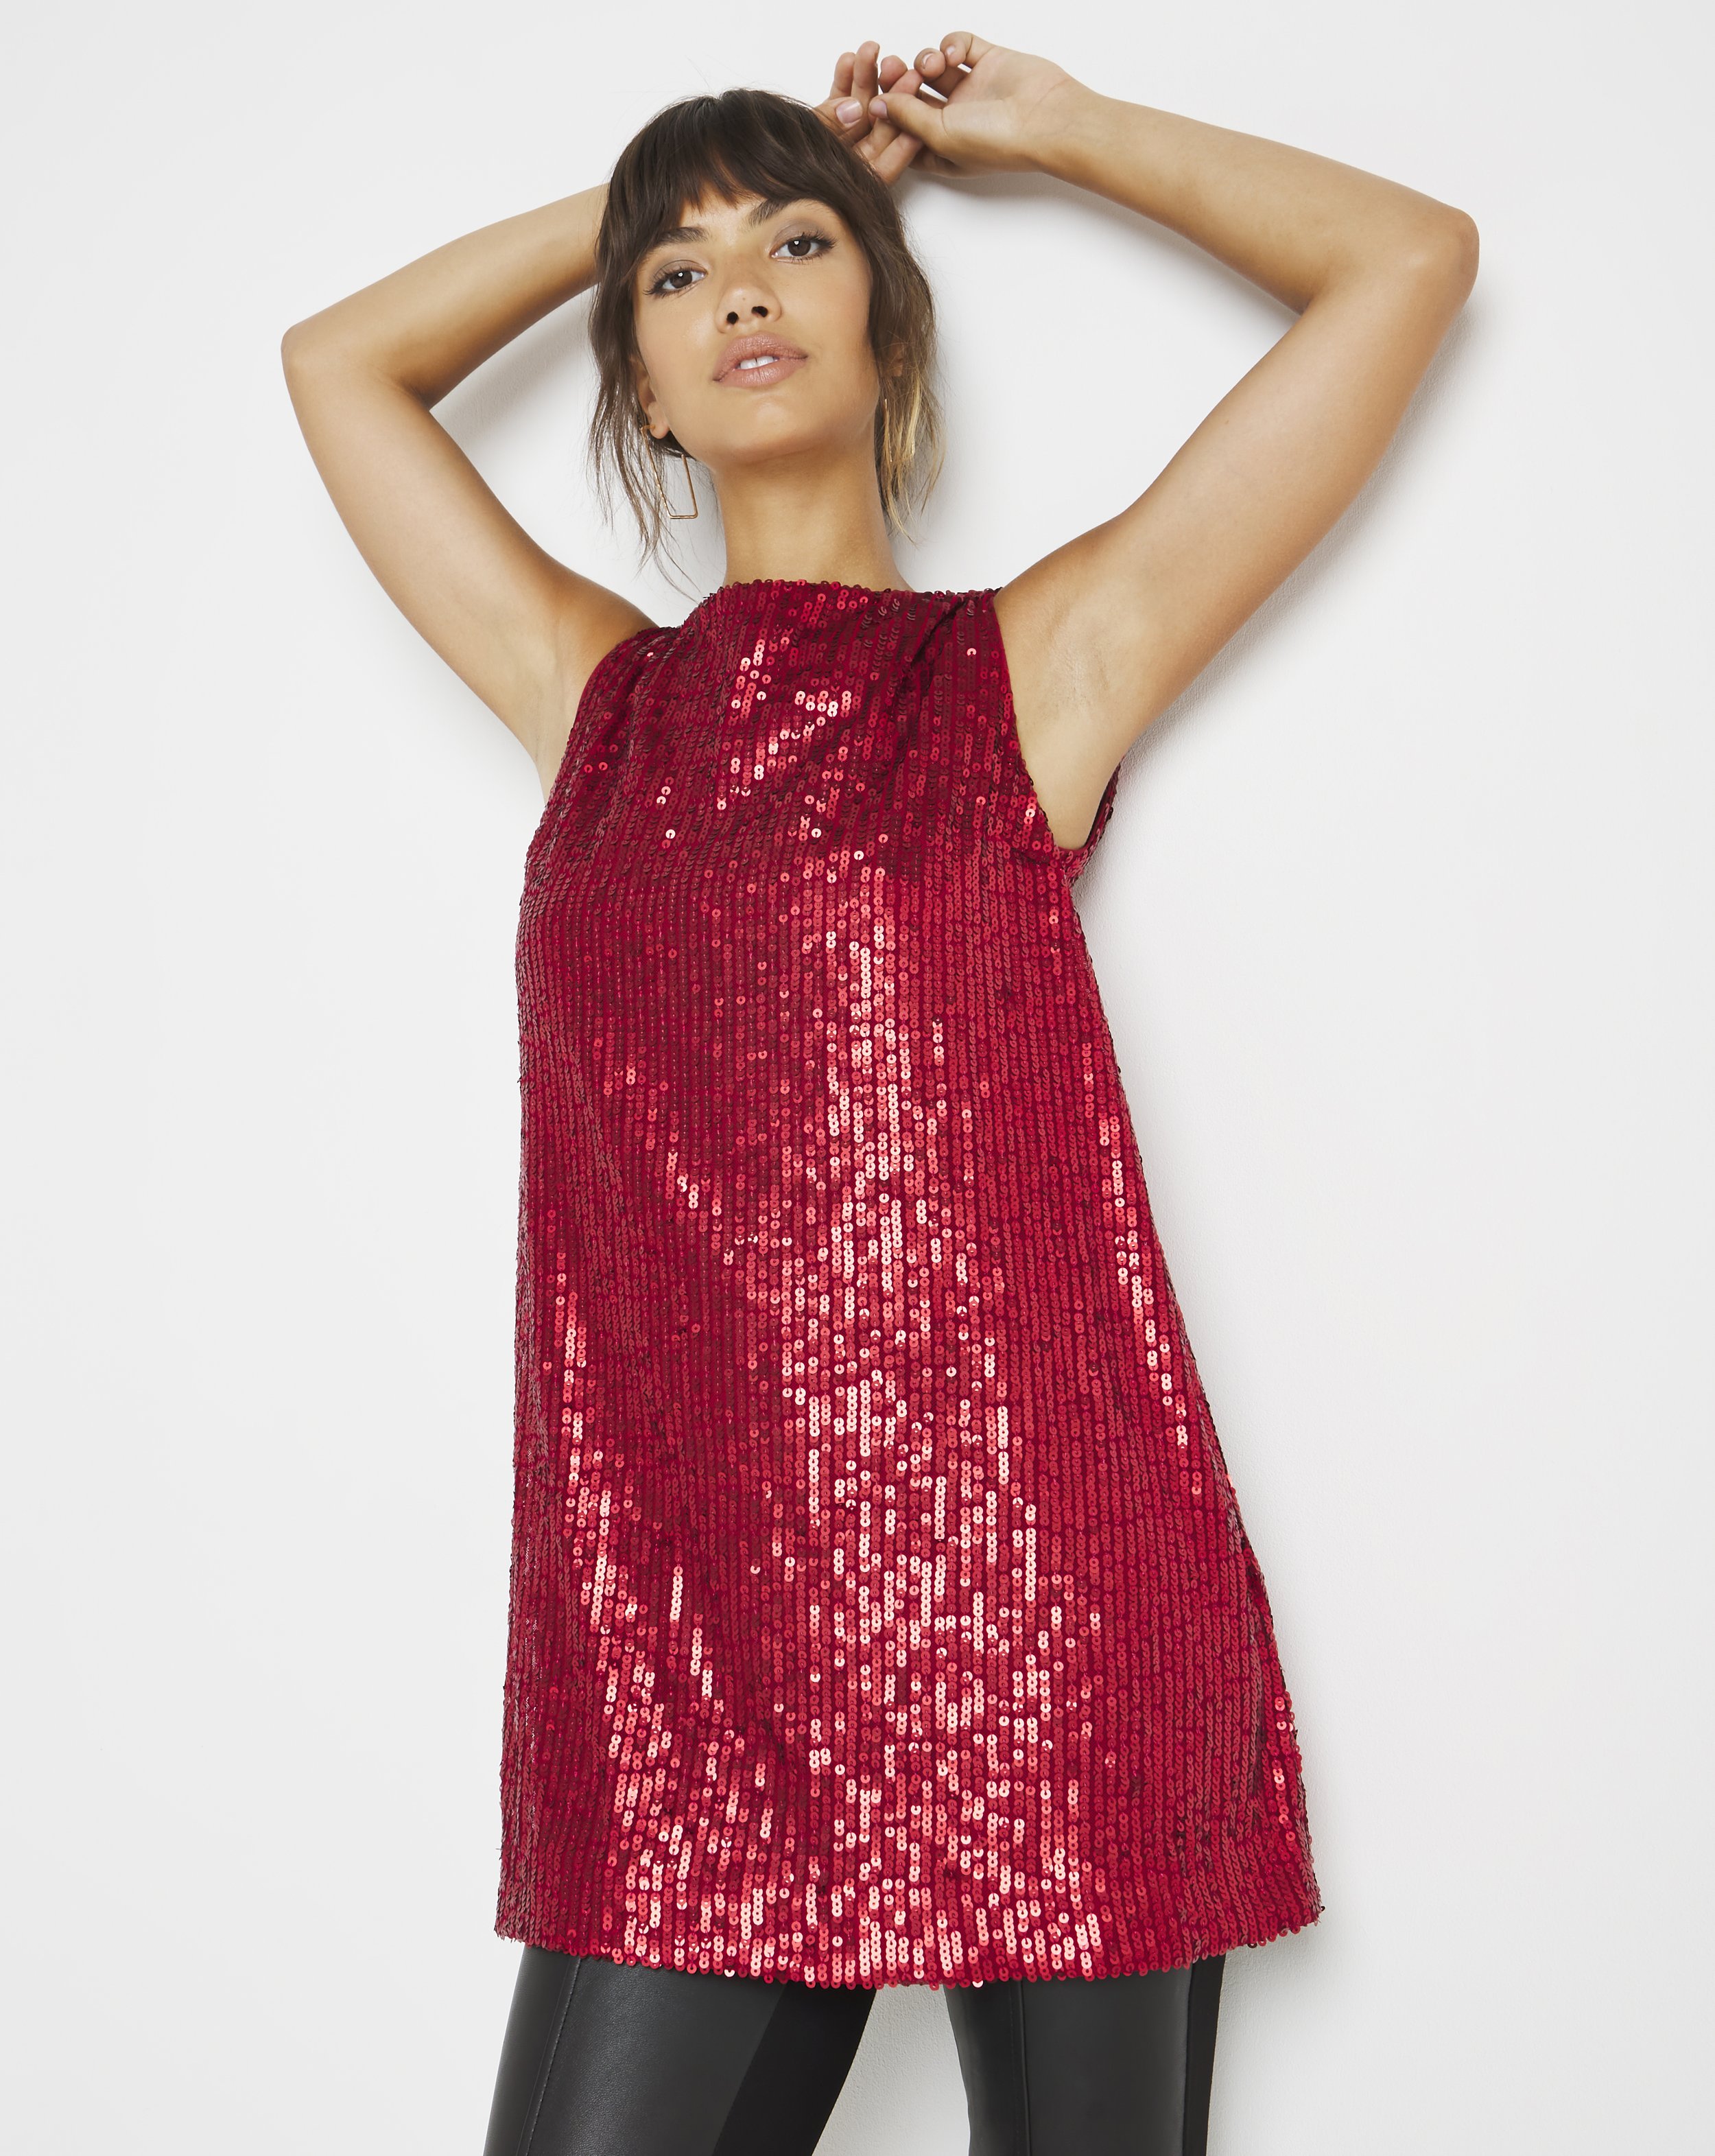 ie 2&gt; Oxendales Joanna Hope Sequin Cowl Tunic €82.50